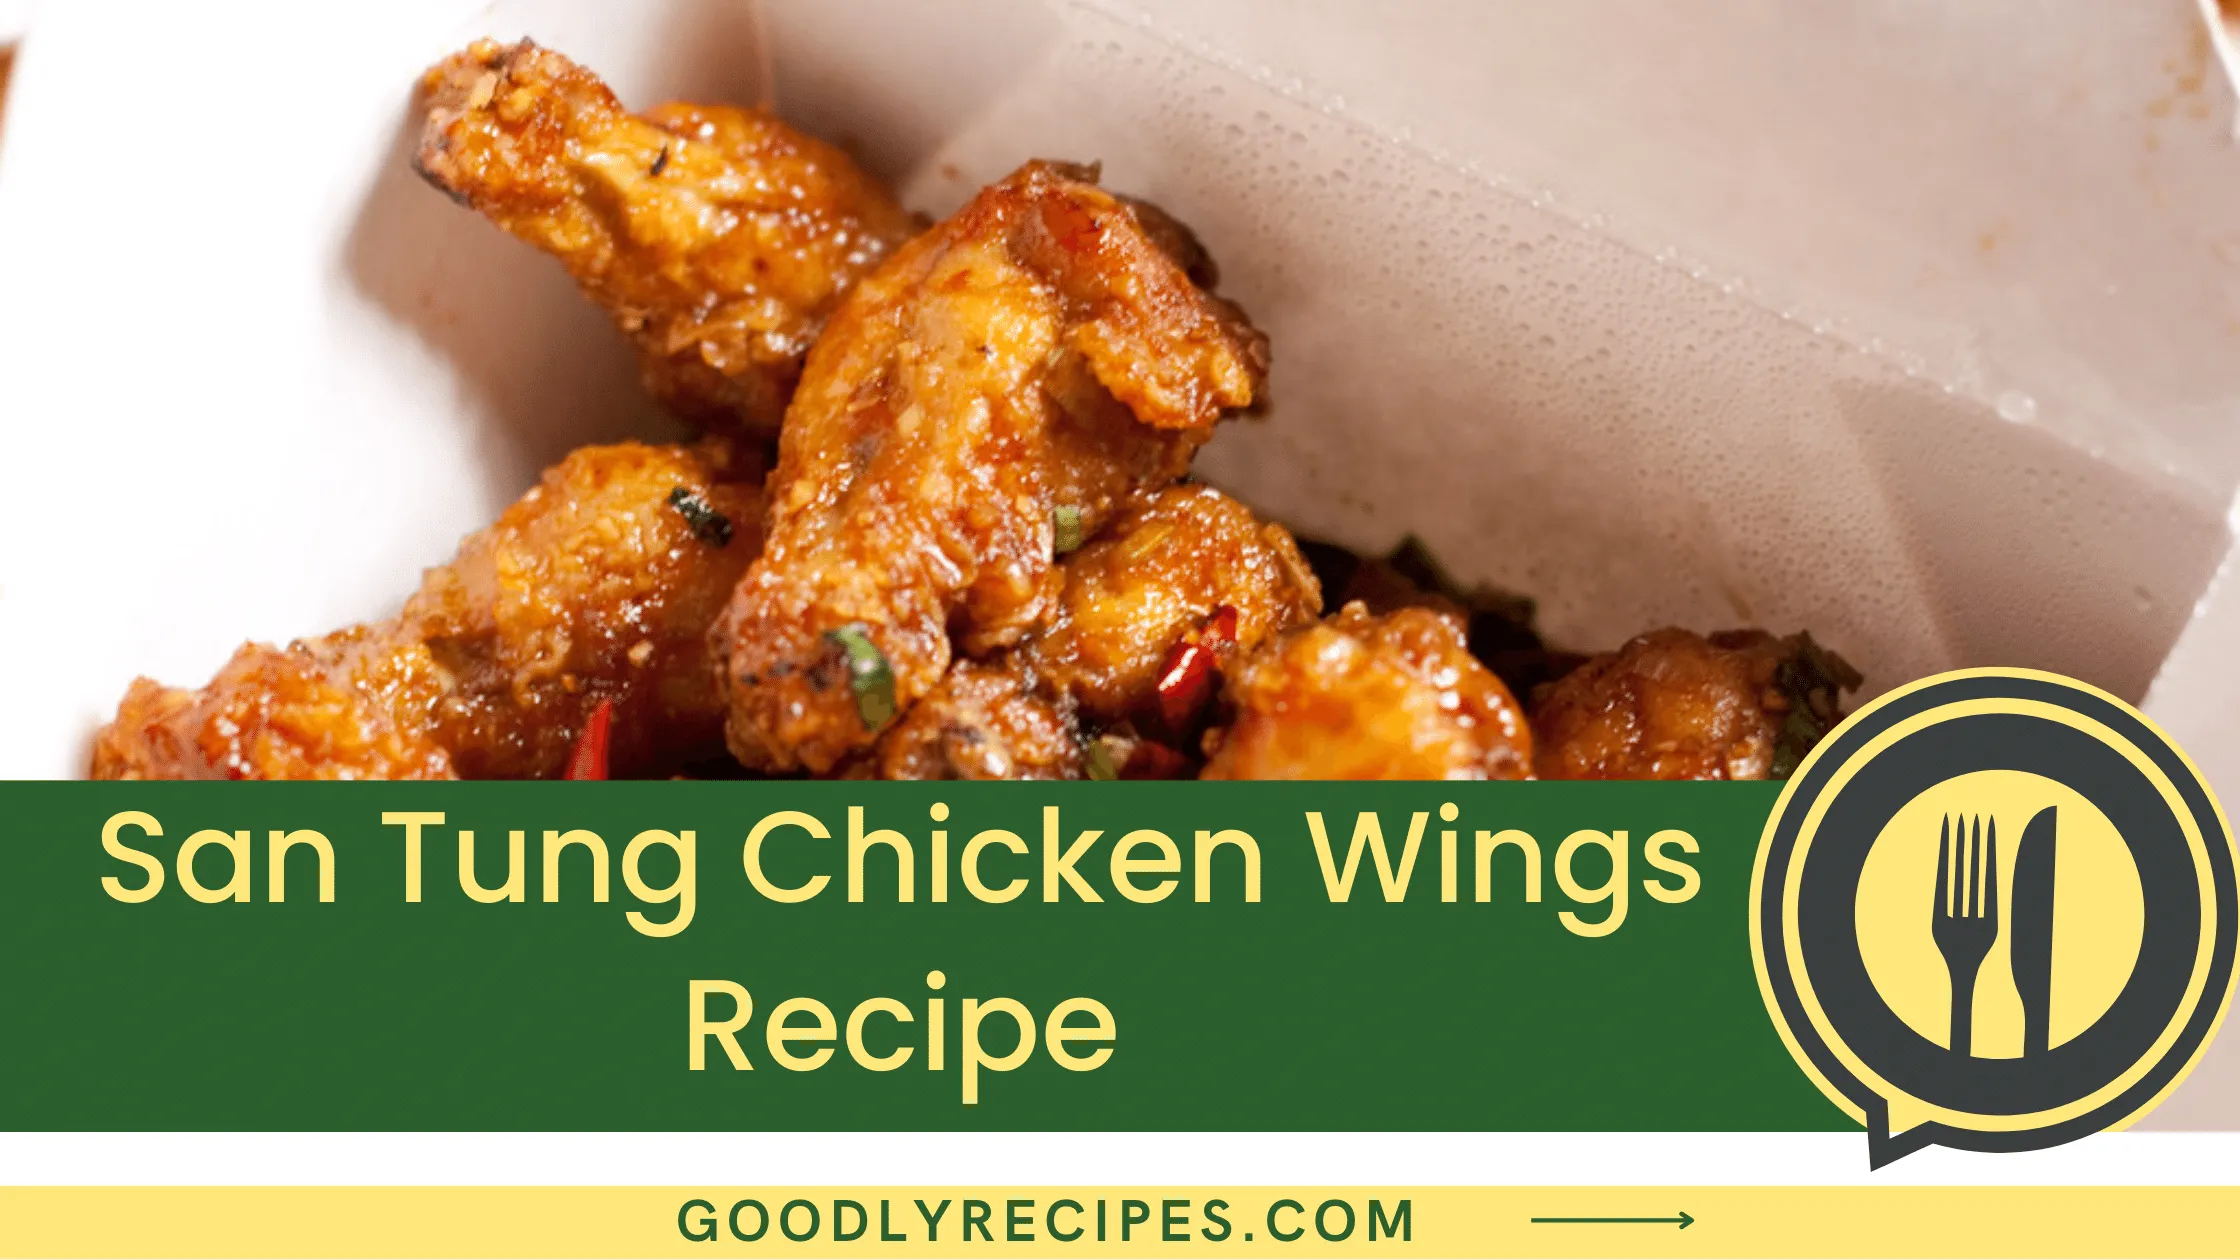 What is San Tung Chicken Wings Recipe?